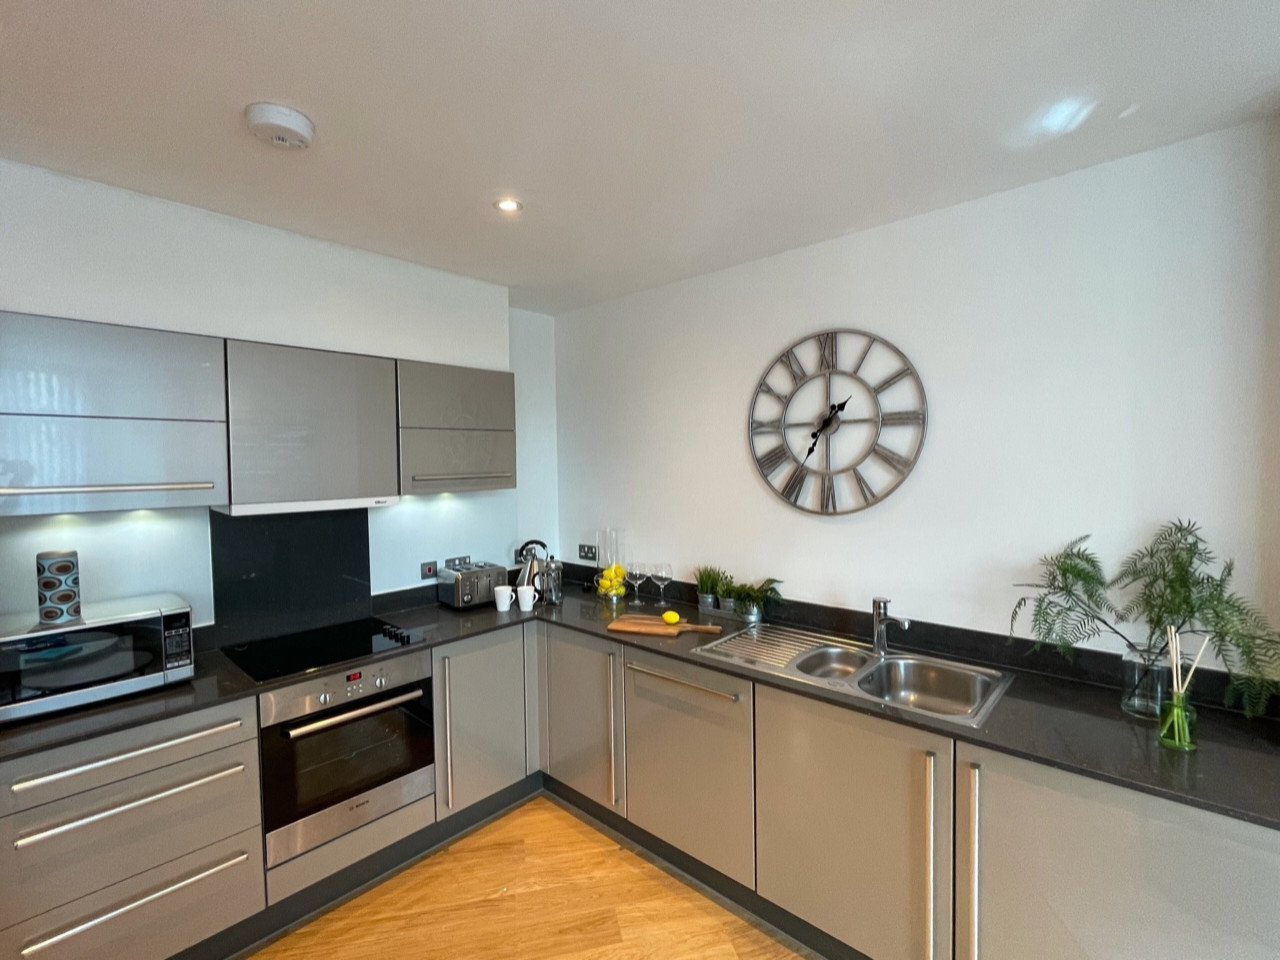 One Bedroom flat in Canary Wharf - Staged for Rental